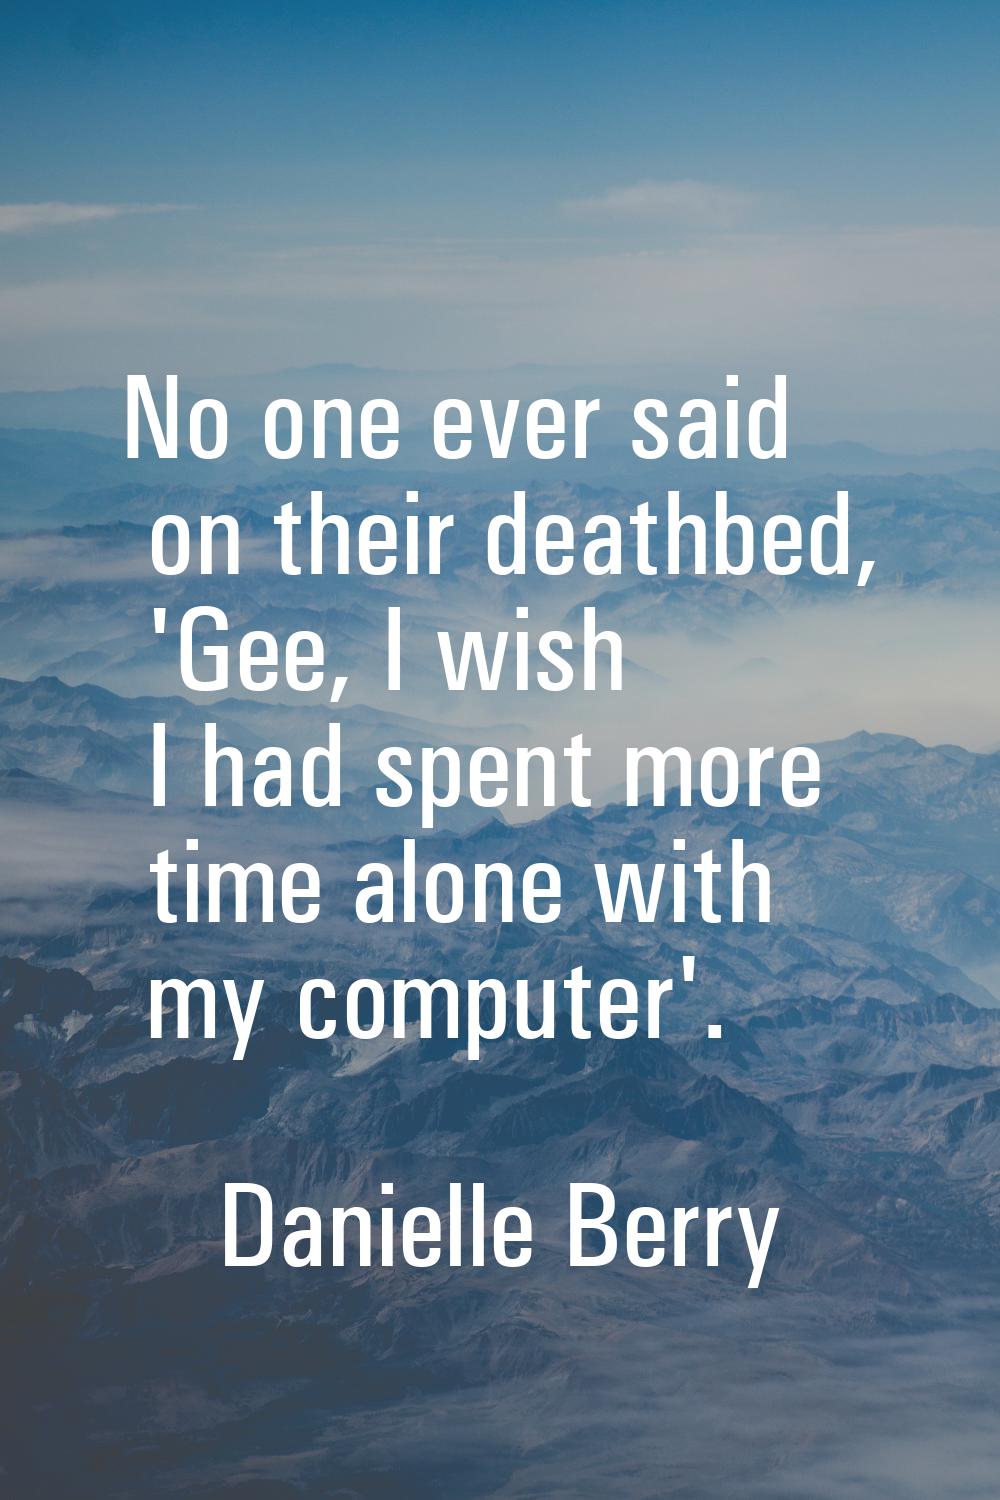 No one ever said on their deathbed, 'Gee, I wish I had spent more time alone with my computer'.